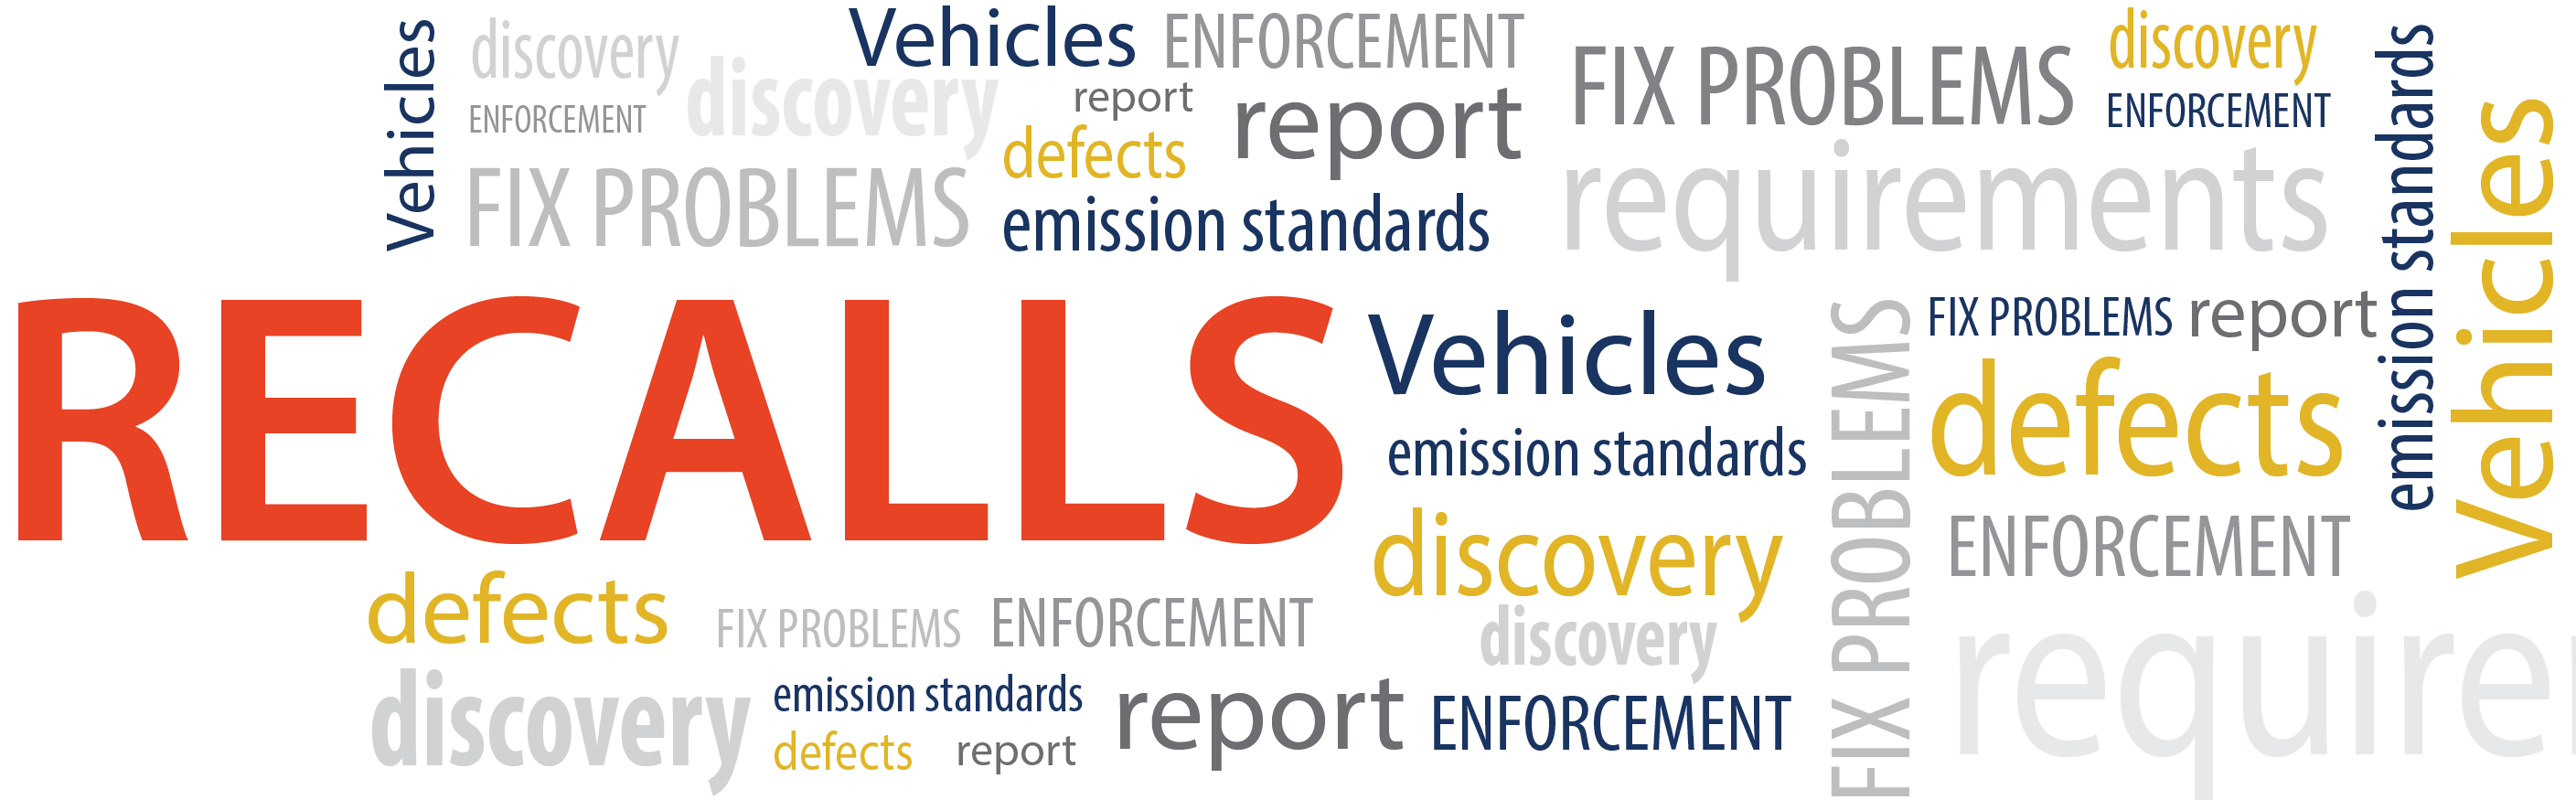 Image of a word cloud and words related to recalls. Link to https://www.epa.gov/recalls/recalls-vehicles-and-engines